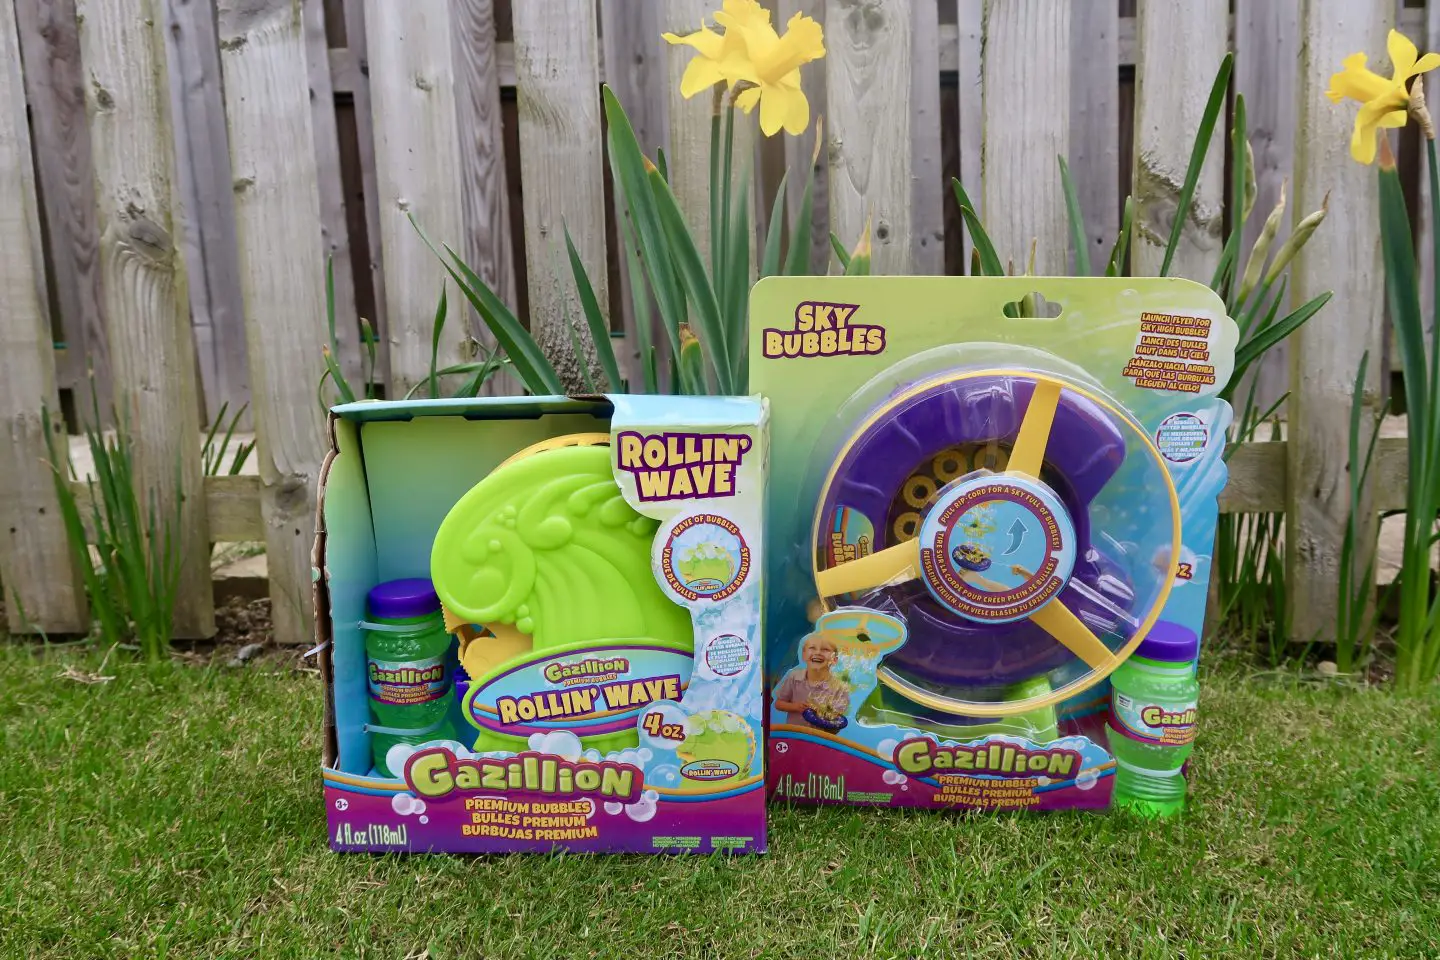 A Gazillion Bubble Rollin' Wave machine and a Sky Bubbles machine in their packaging ont he grass next to a daffodil